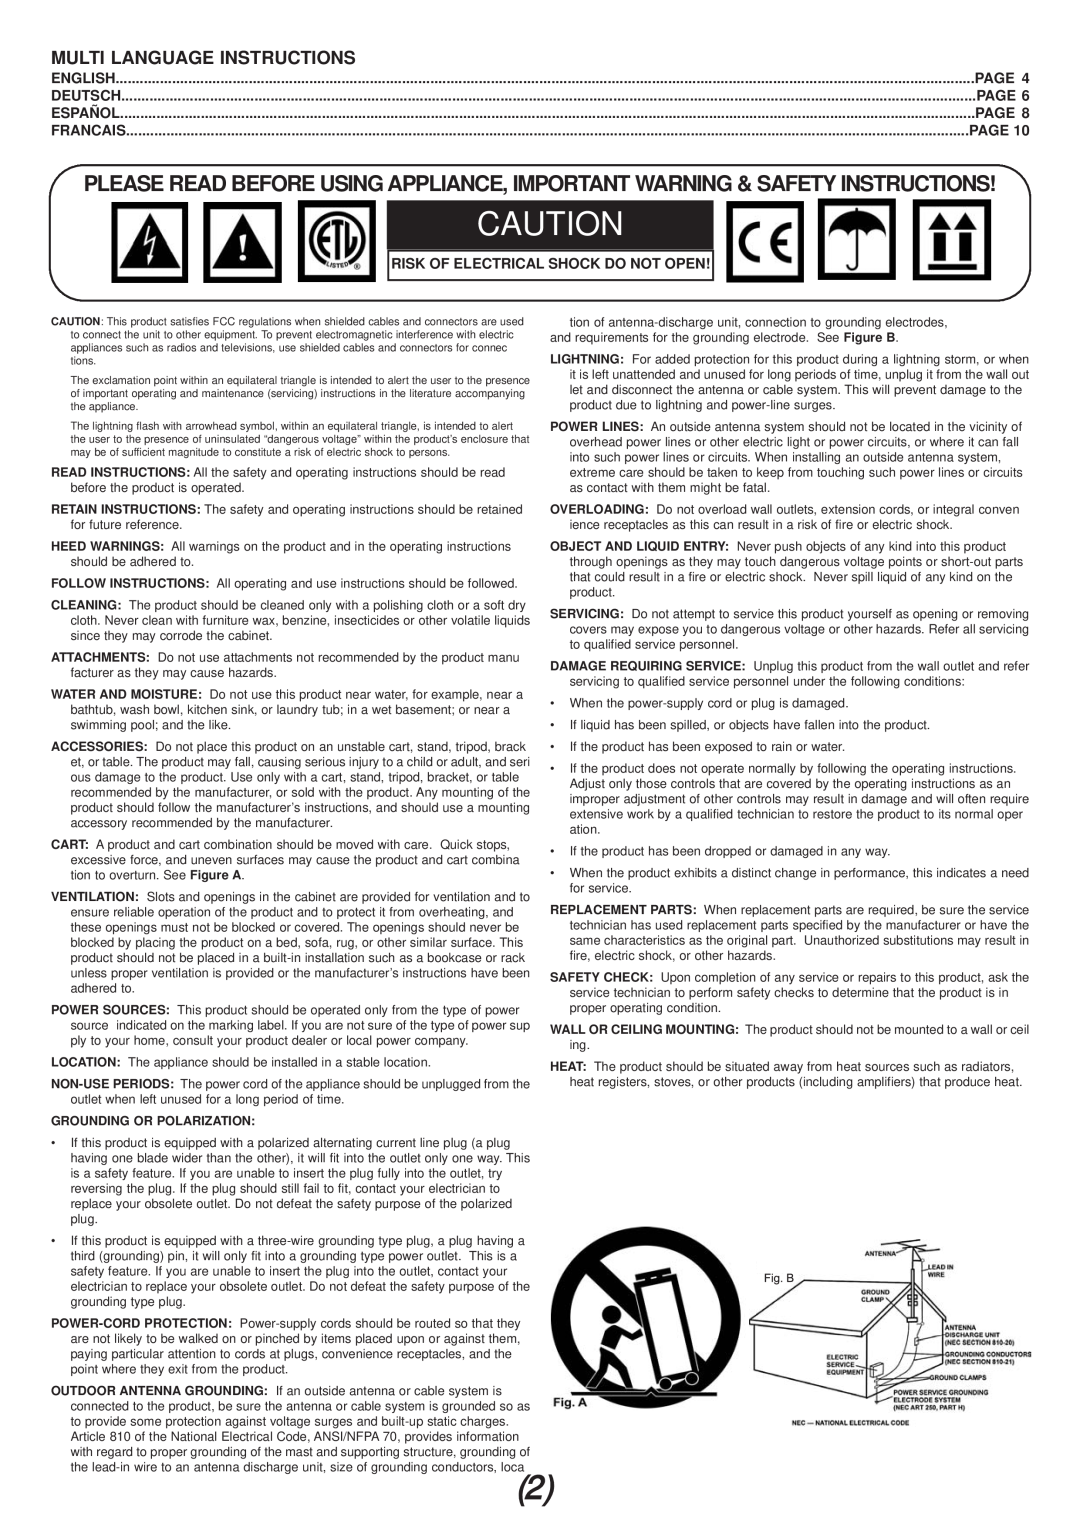 Gemini TT-01mkii manual Multi Language Instructions, Page, Risk Of Electrical Shock Do Not Open, Francais 